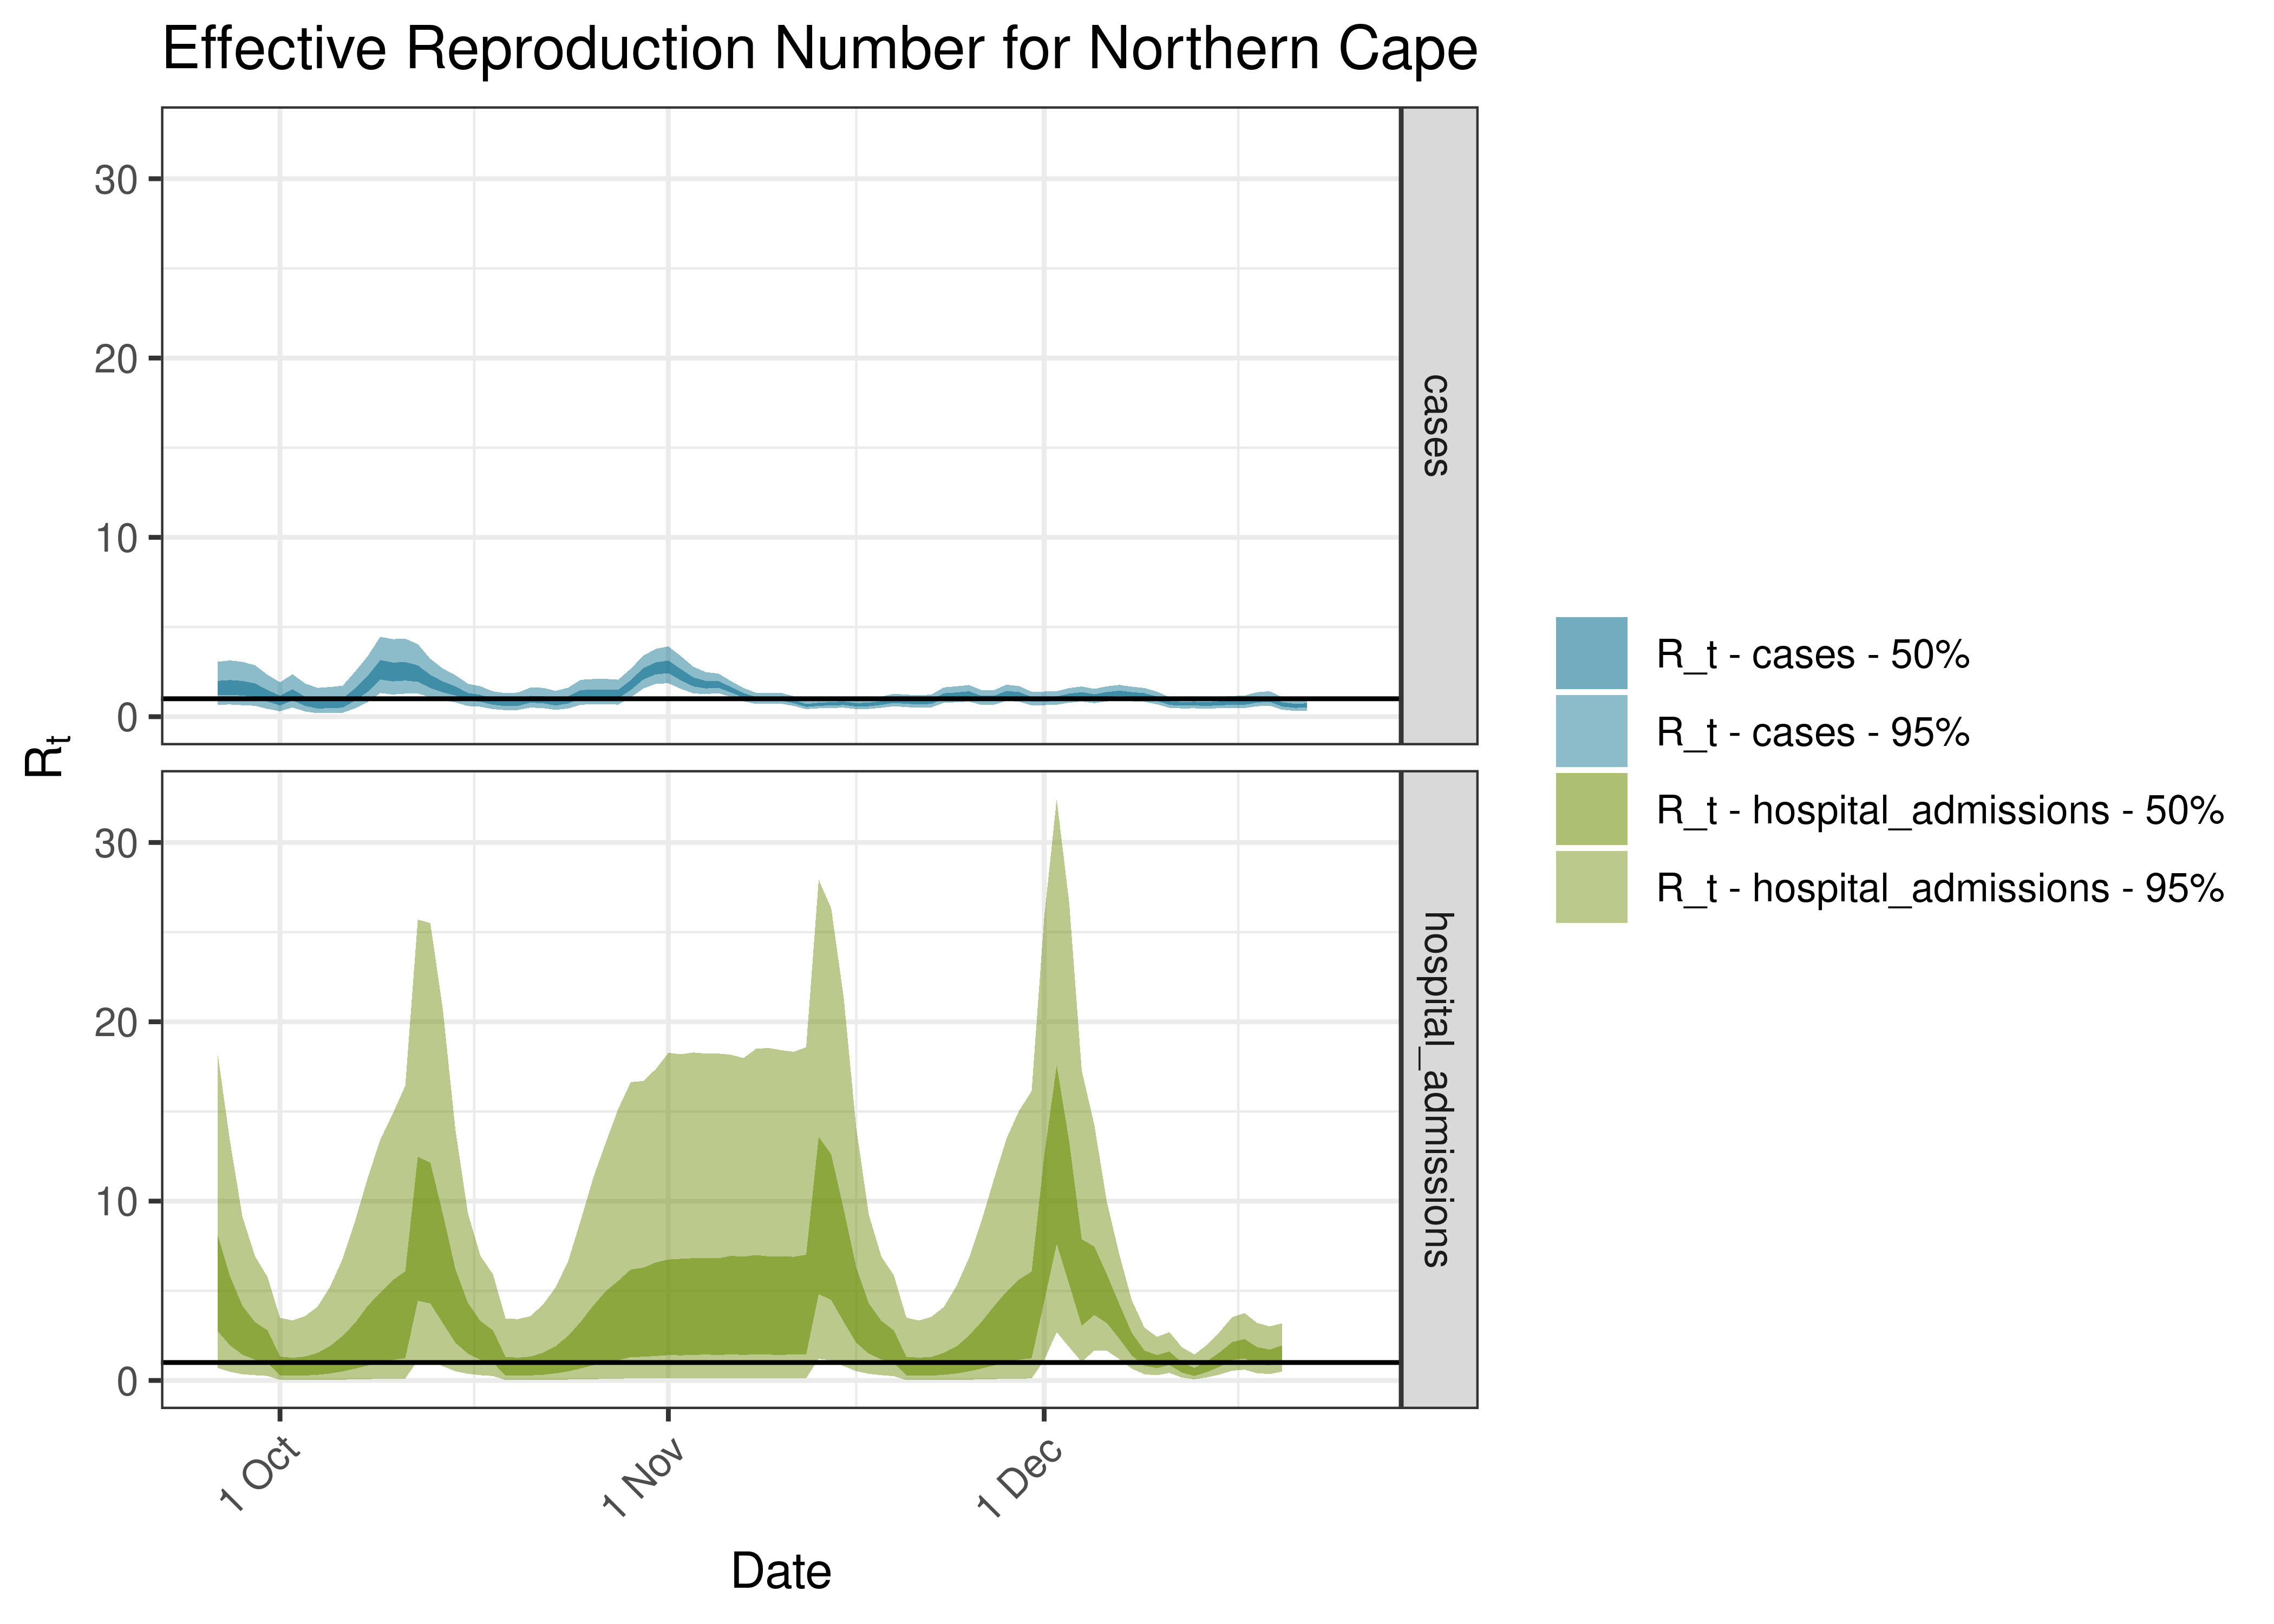 Estimated Effective Reproduction Number for Northern Cape over last 90 days